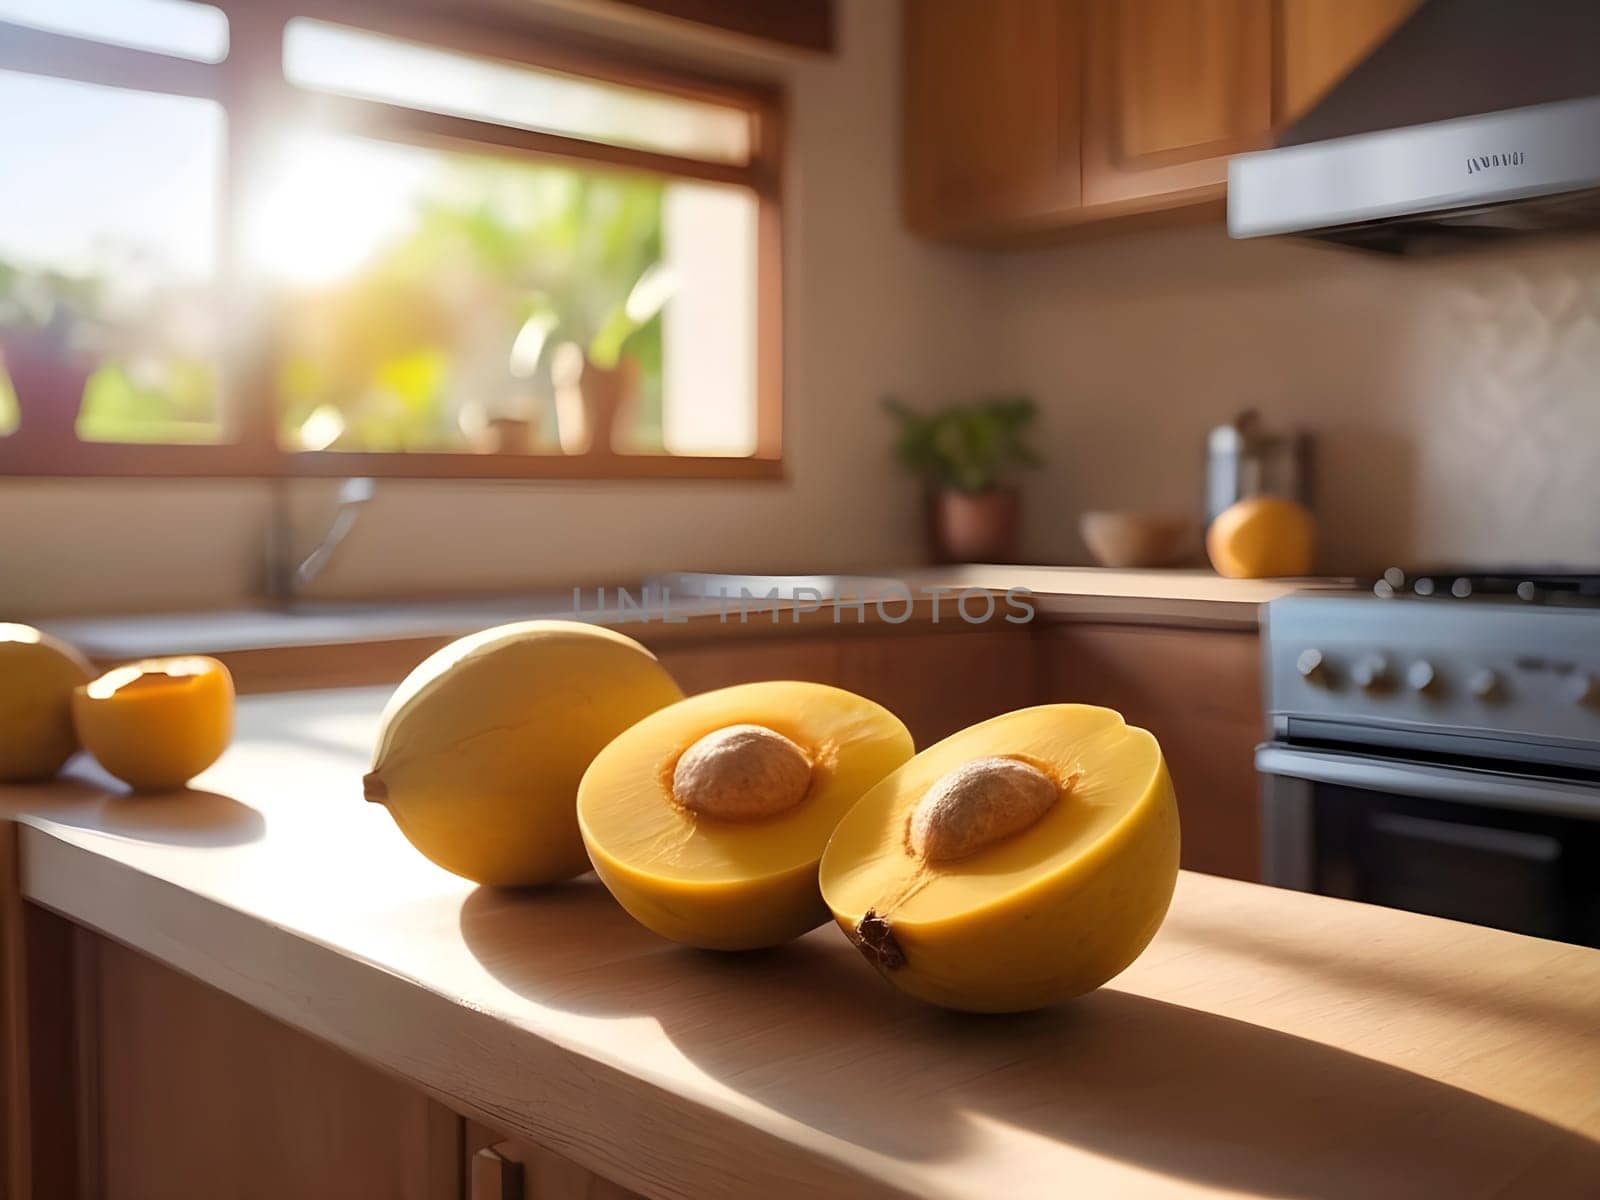 Warm Ambiance: Lucuma's Presence in a Sunlit Kitchen Setting by mailos